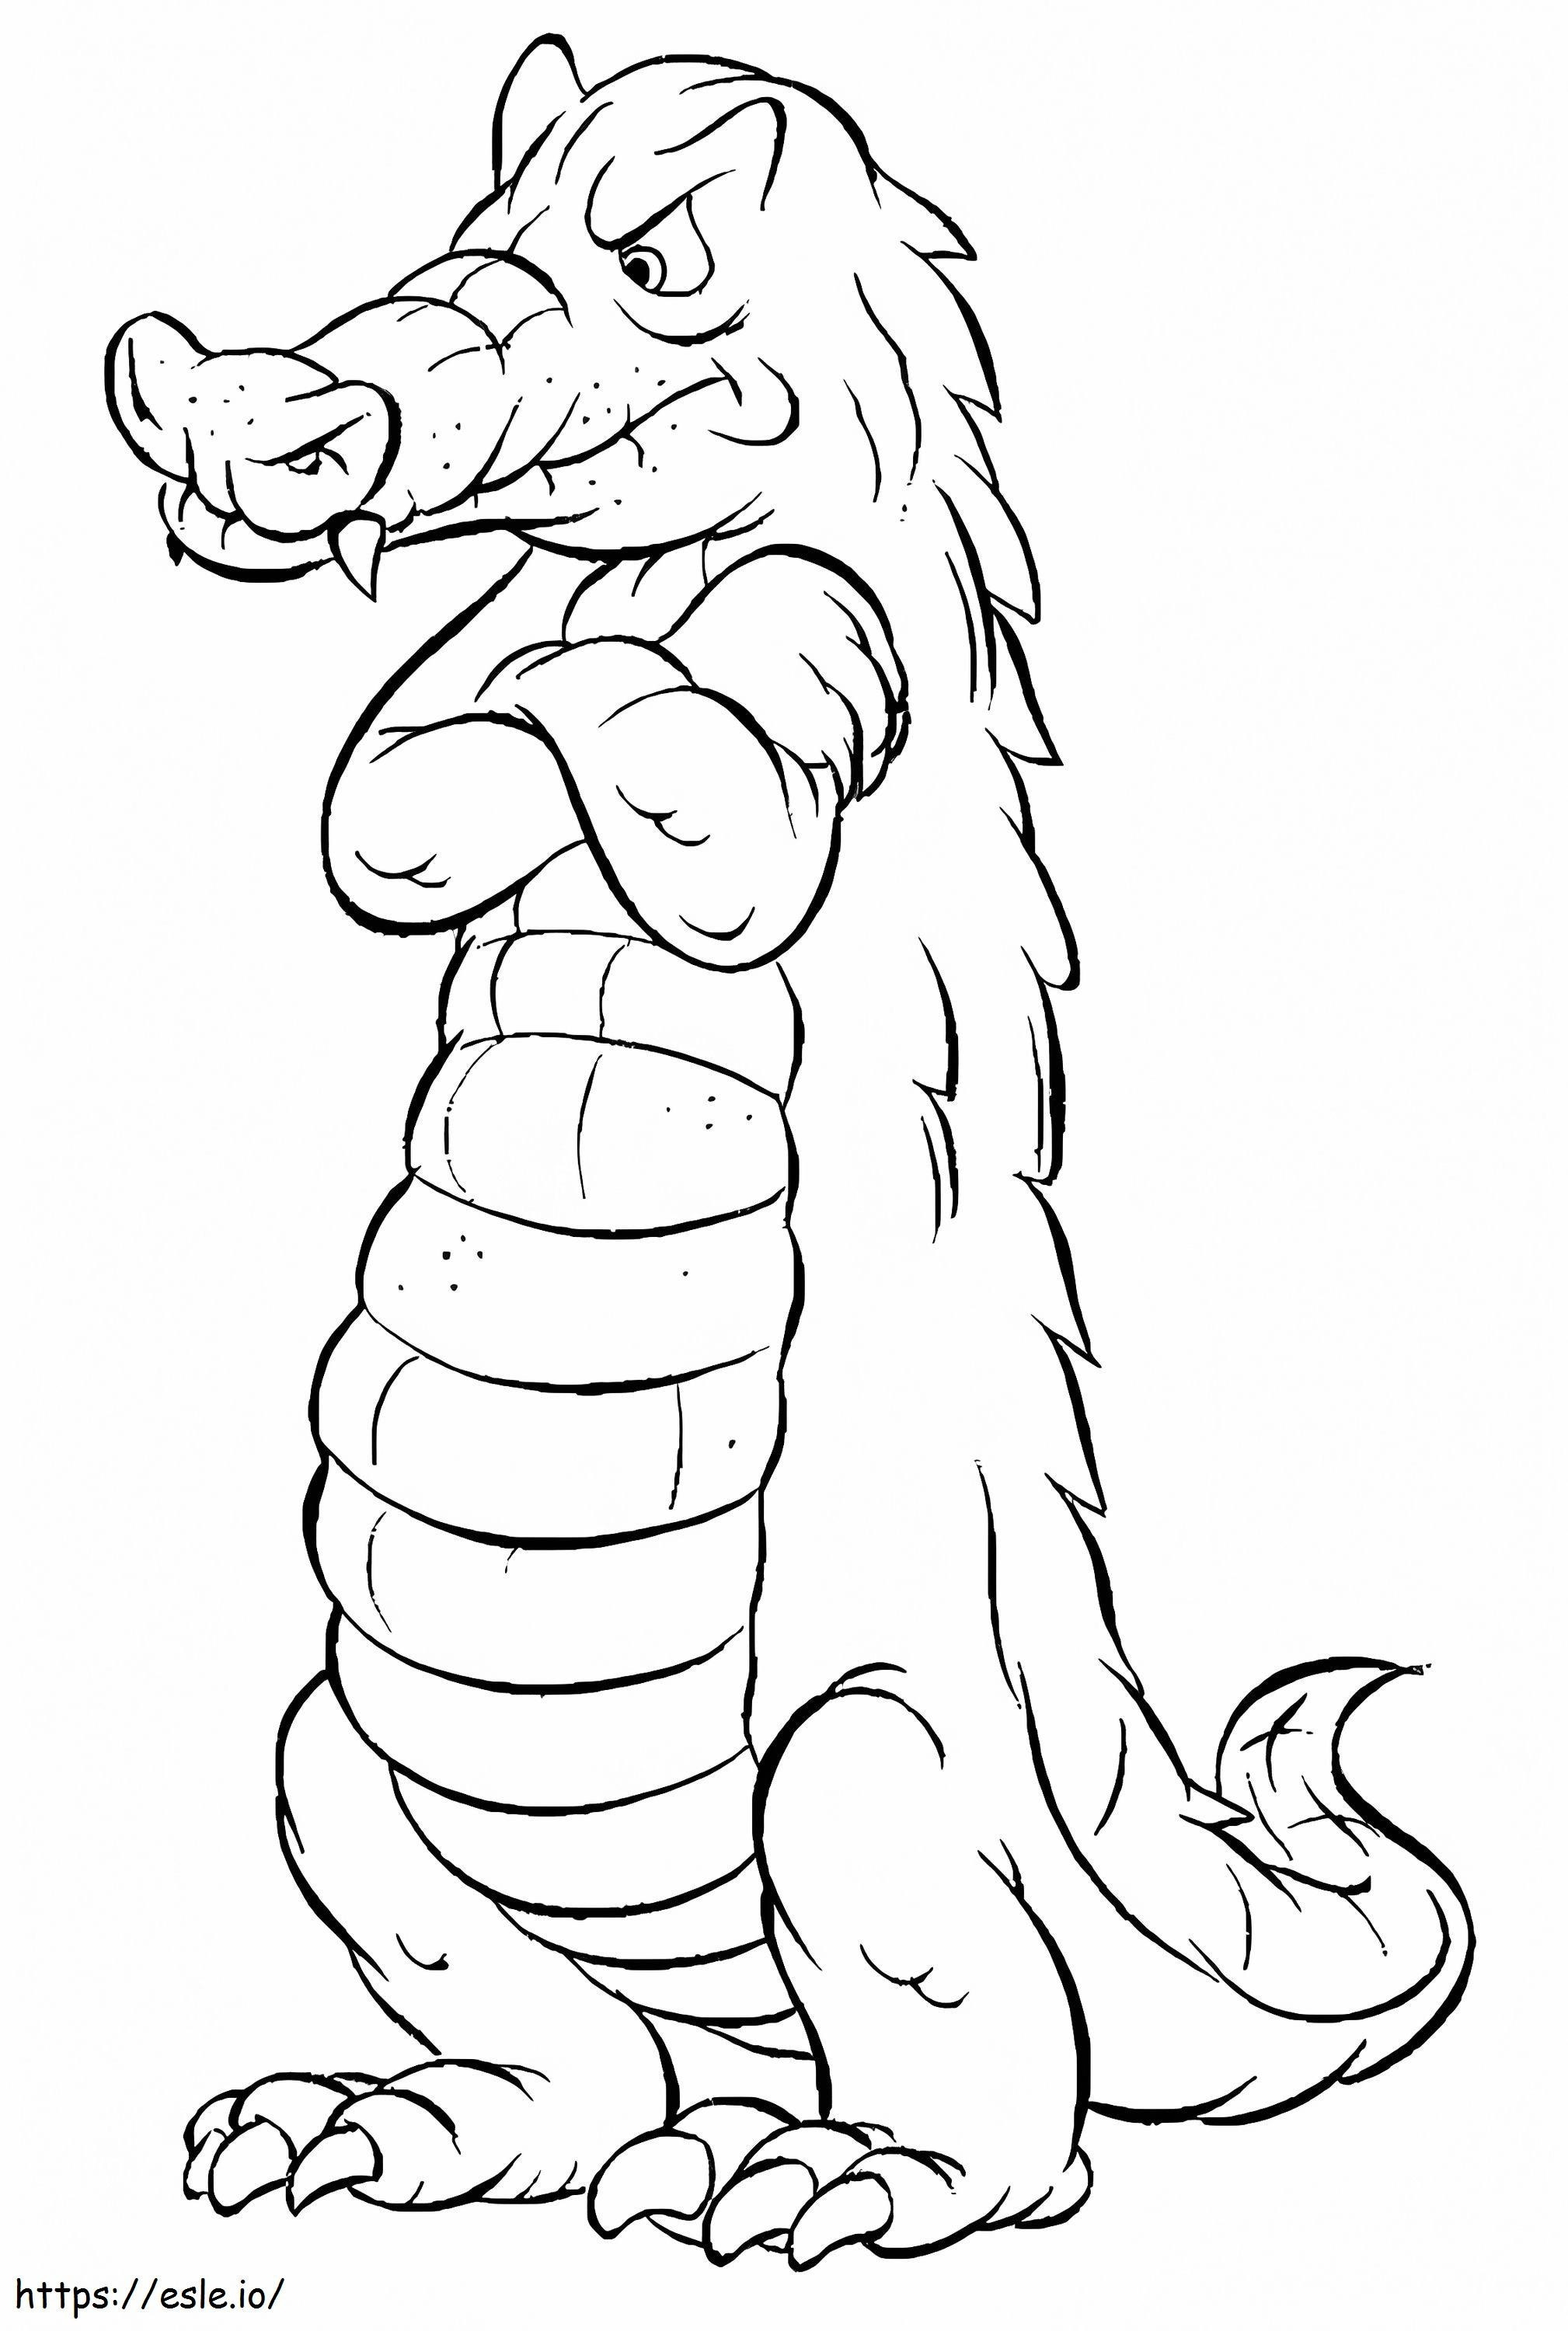 Thinking Crocodile coloring page